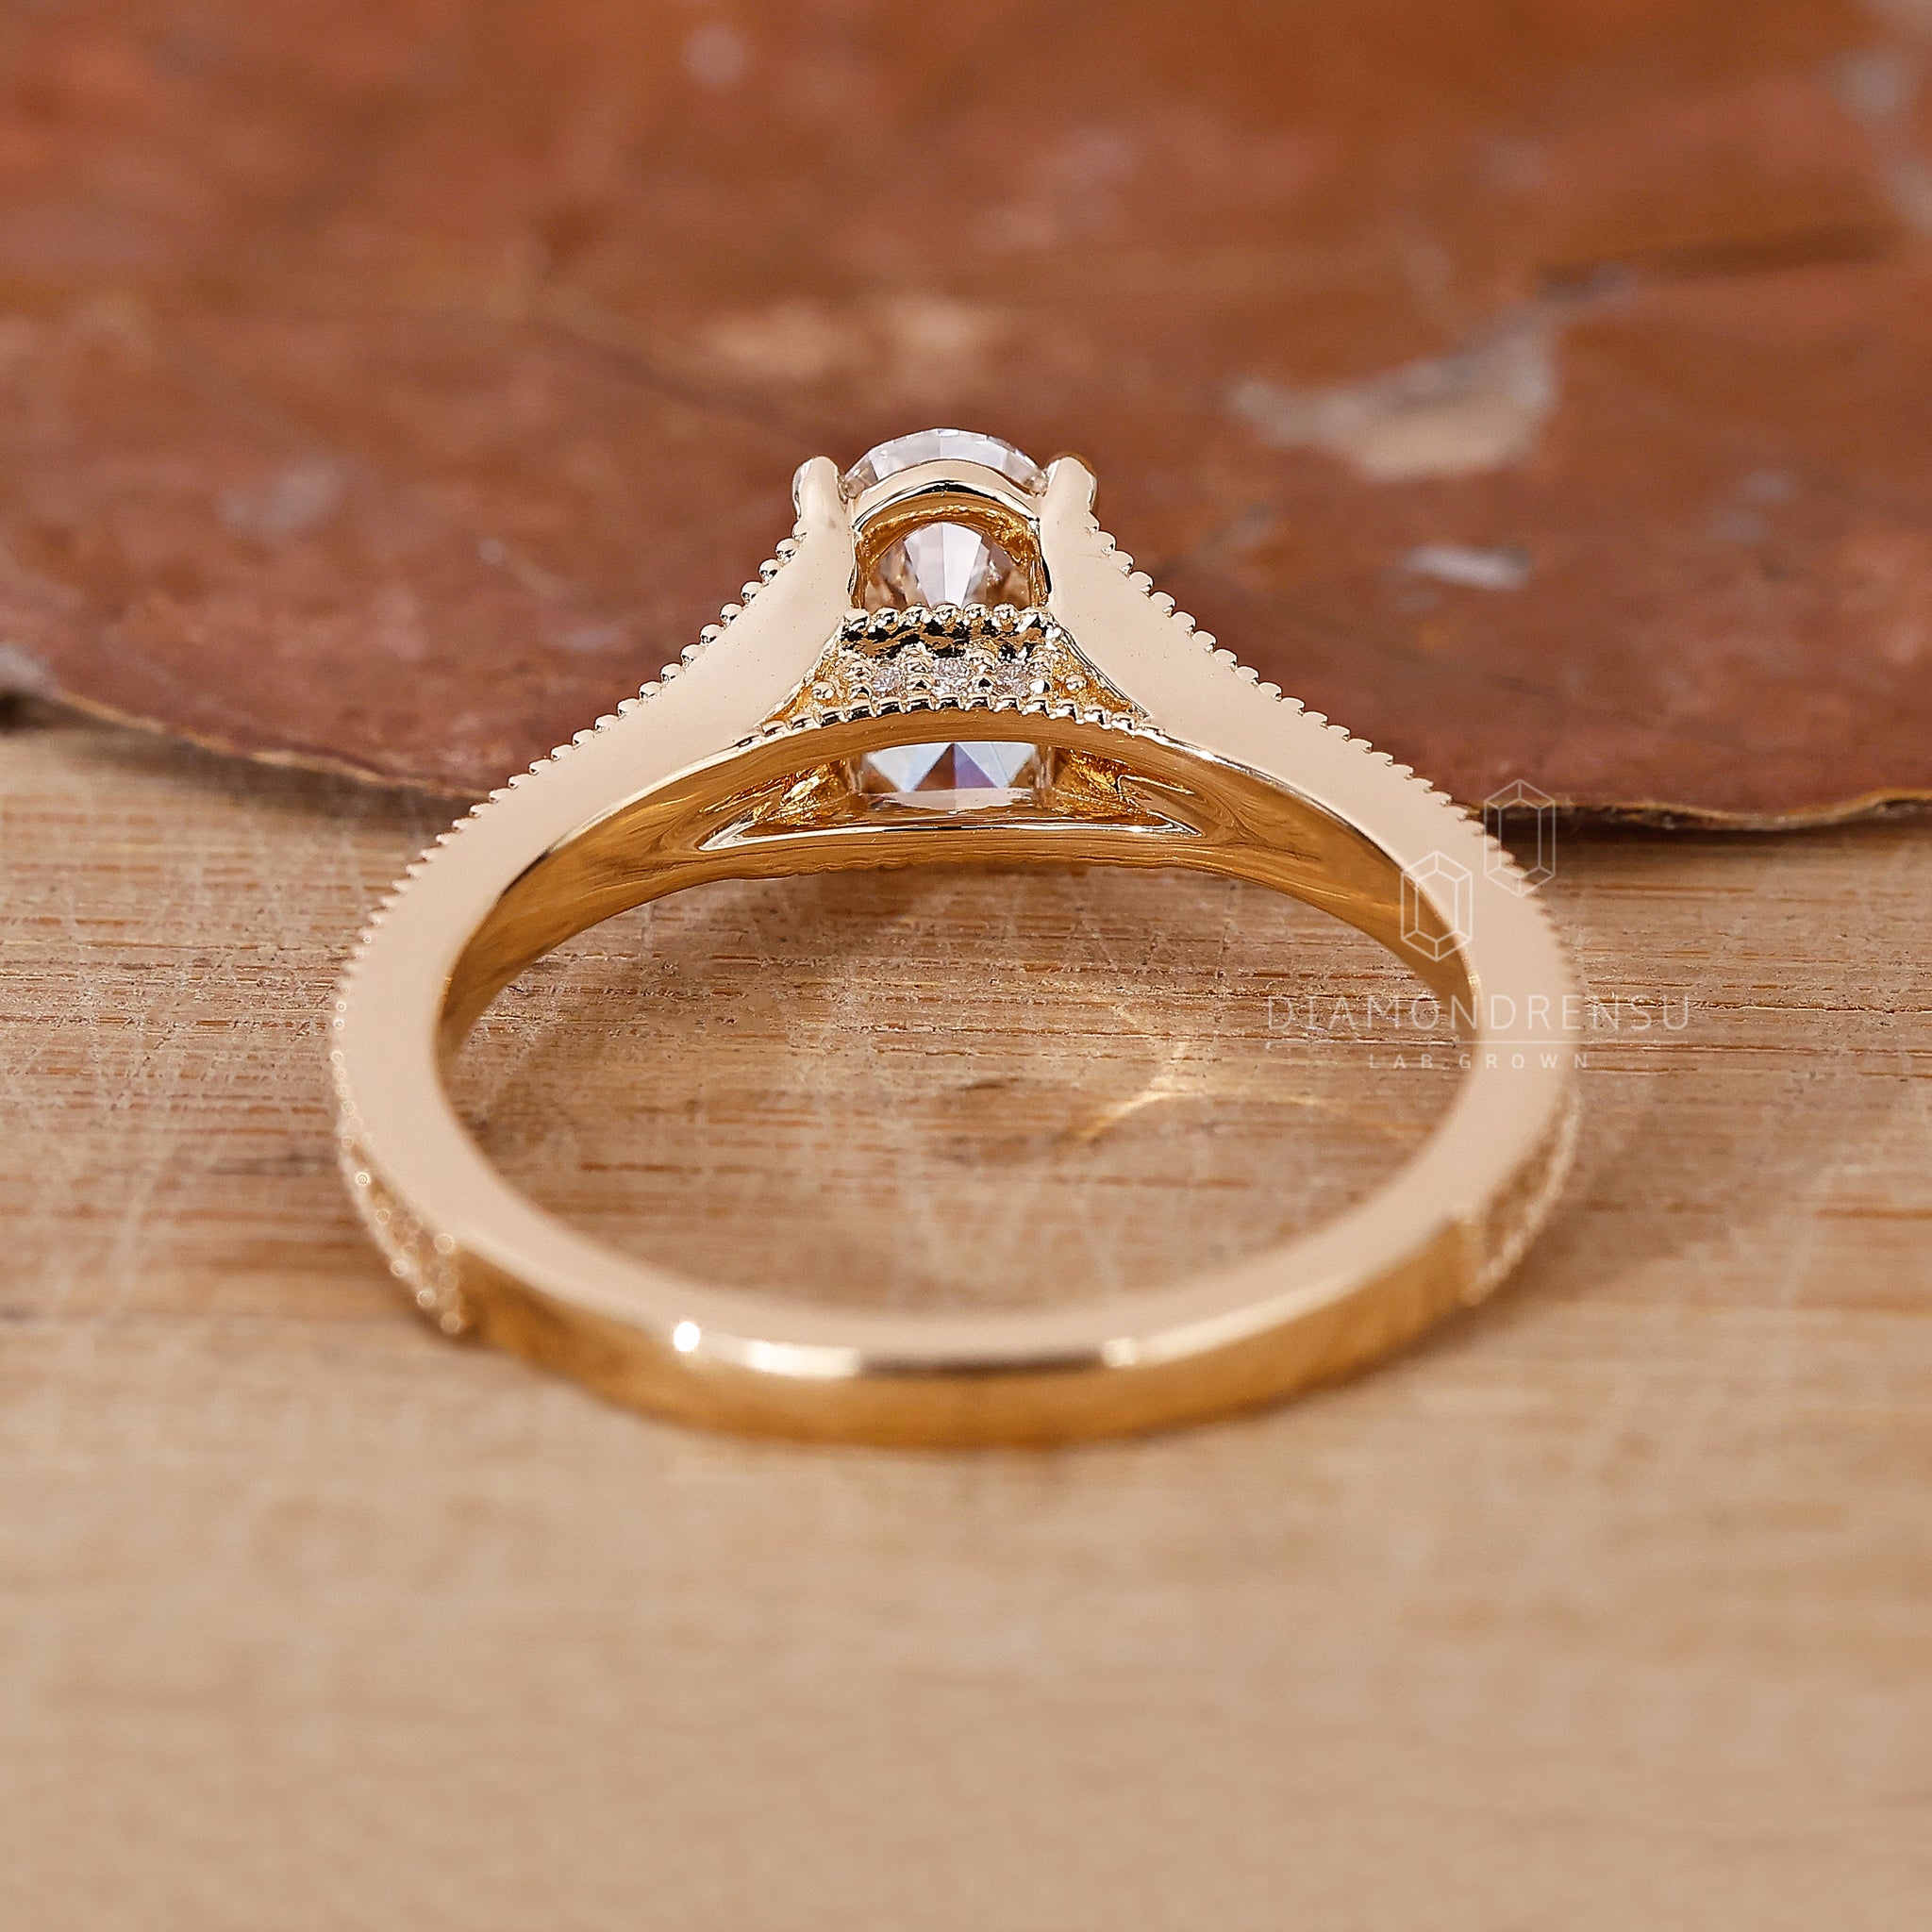 Captivating Oval Lab Grown Diamond Ring, a sustainable symbol of love and beauty